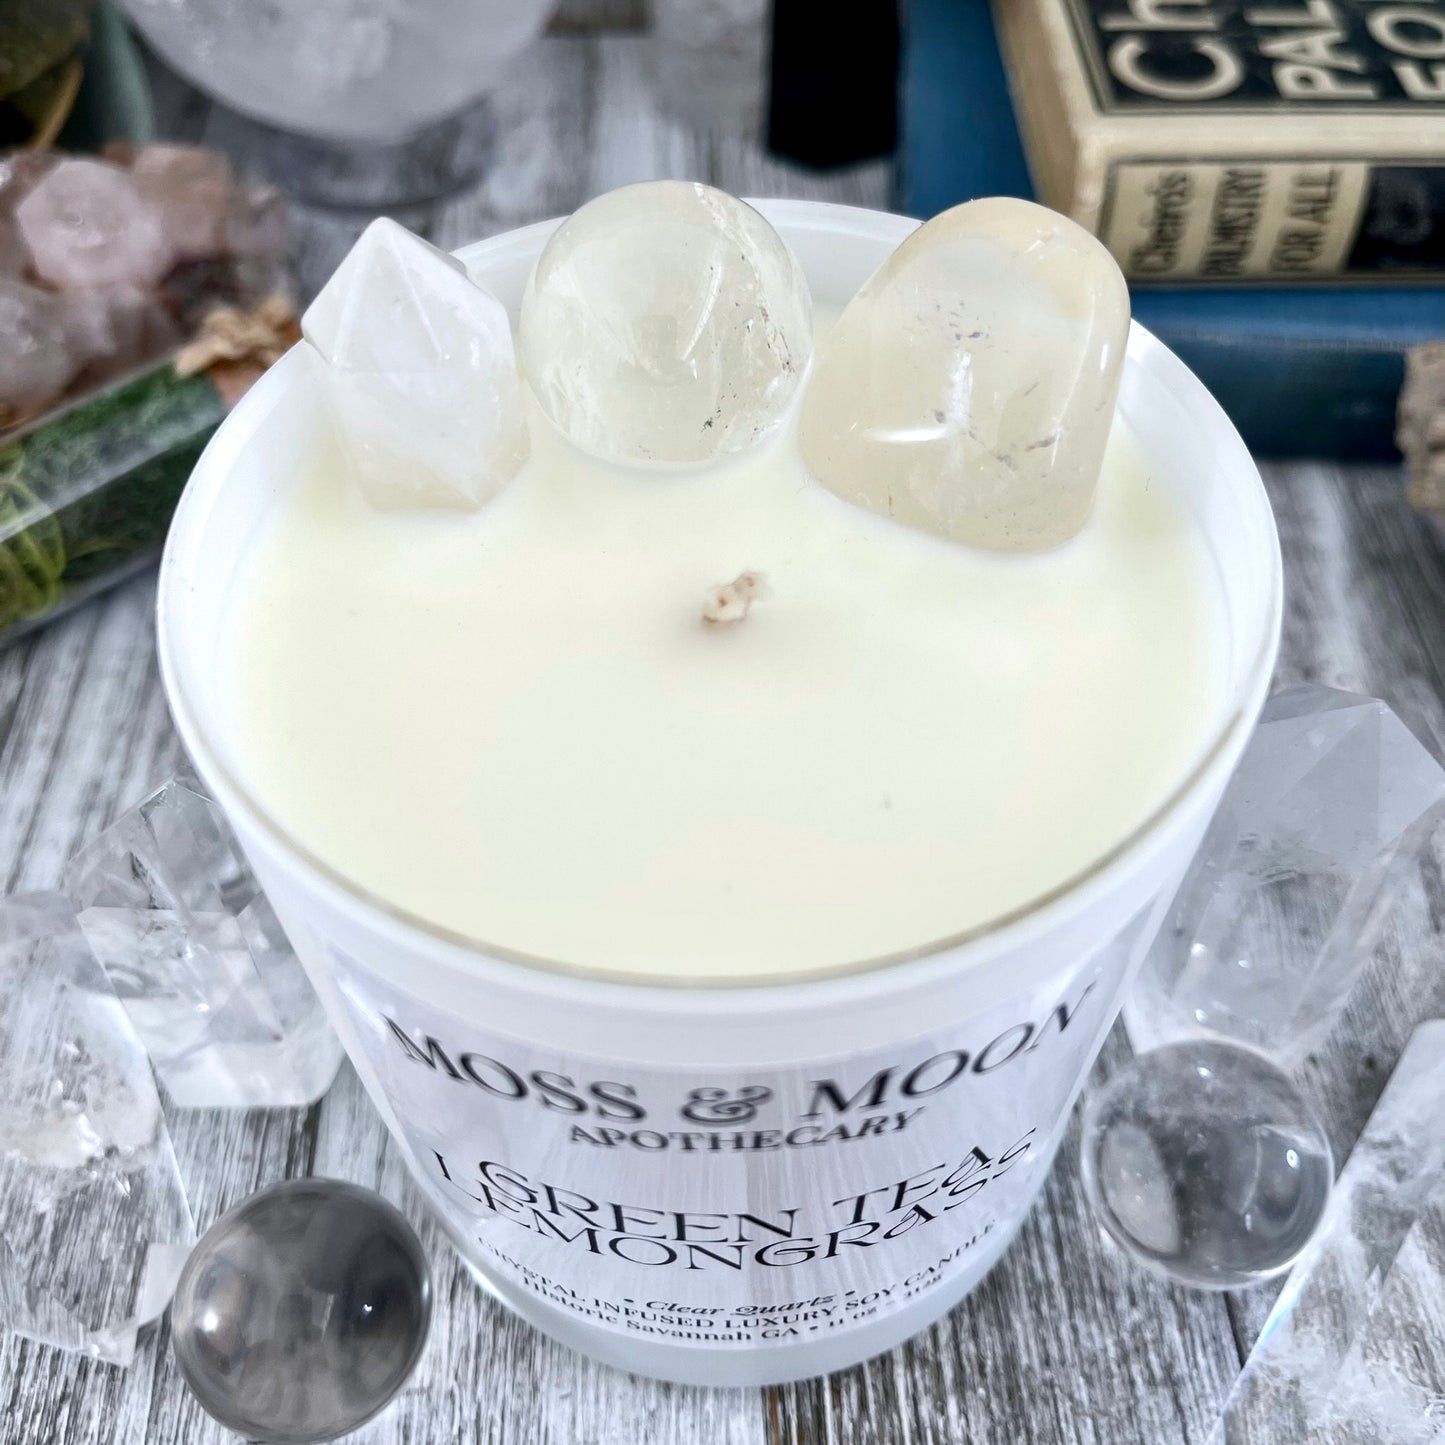 aromatherapy candle, Candles, Candles & Holders, clear quartz, Container Candles, crystal candle, Crystal Candles, crystal healing, eco-friendly candle, Etsy ID: 1480261705, Green Tea candle, handmade candle, Home & Living, Home Decor, Lemongrass Candle,